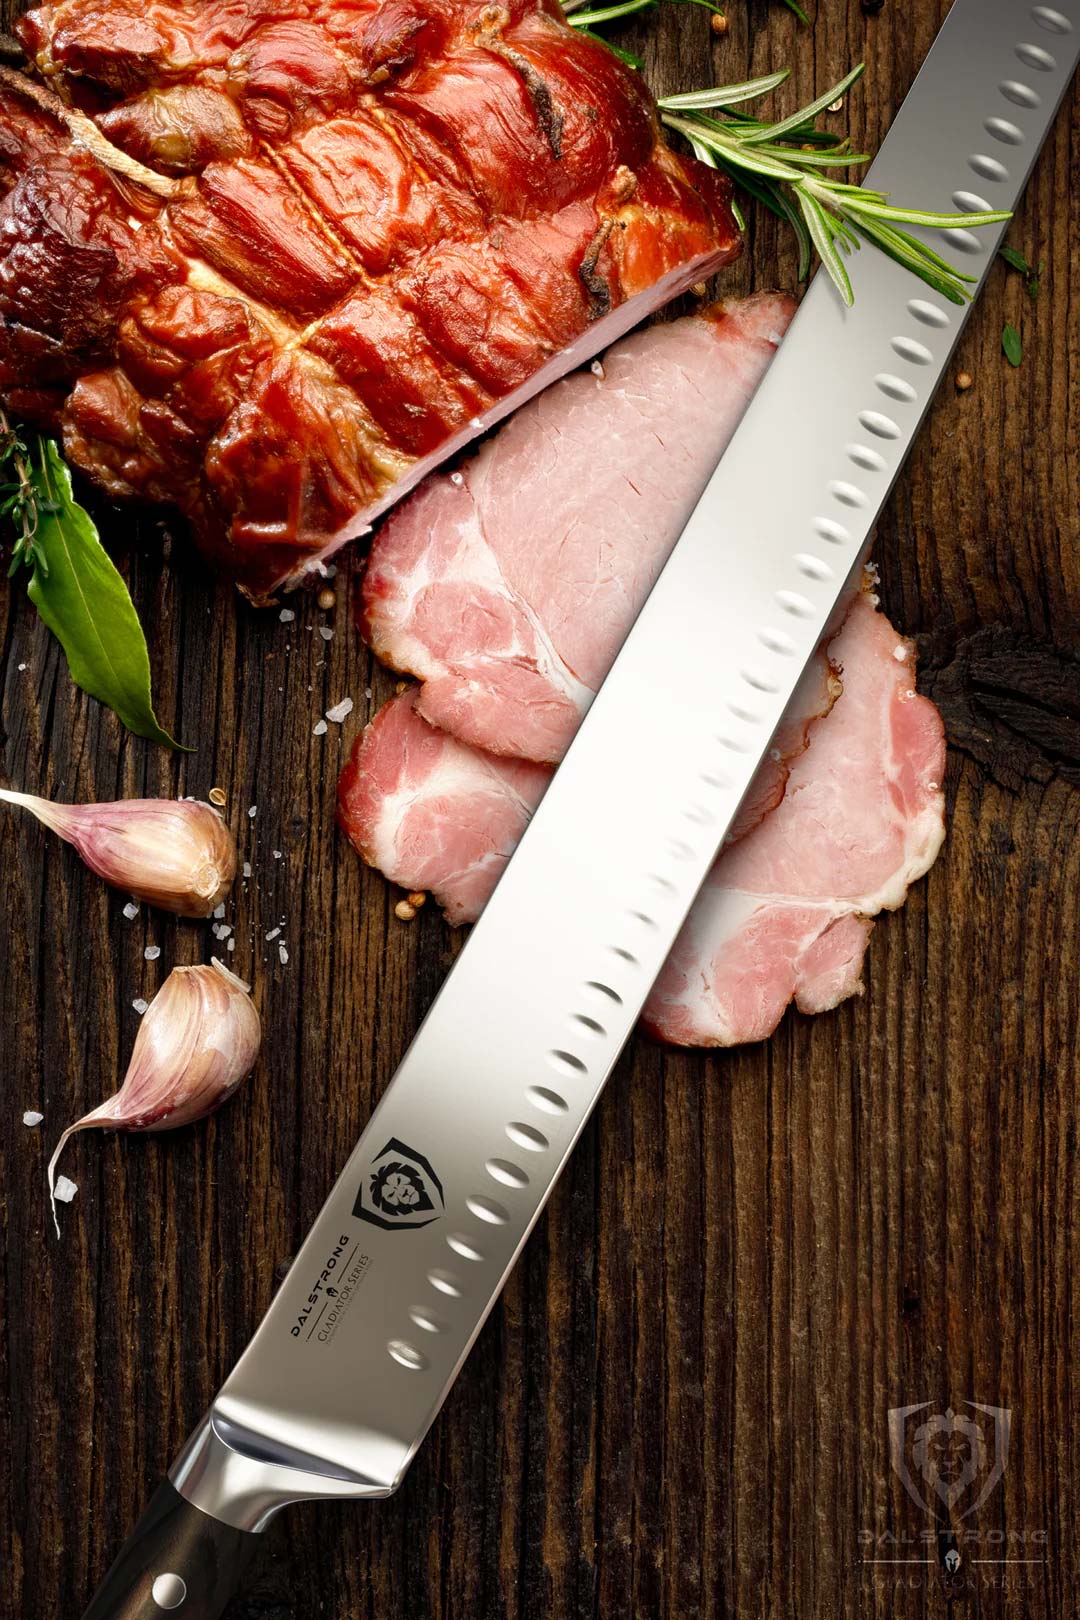 Dalstrong gladiator series 14 inch long slicer knife with black handle and a sliced meat on a wooden table.